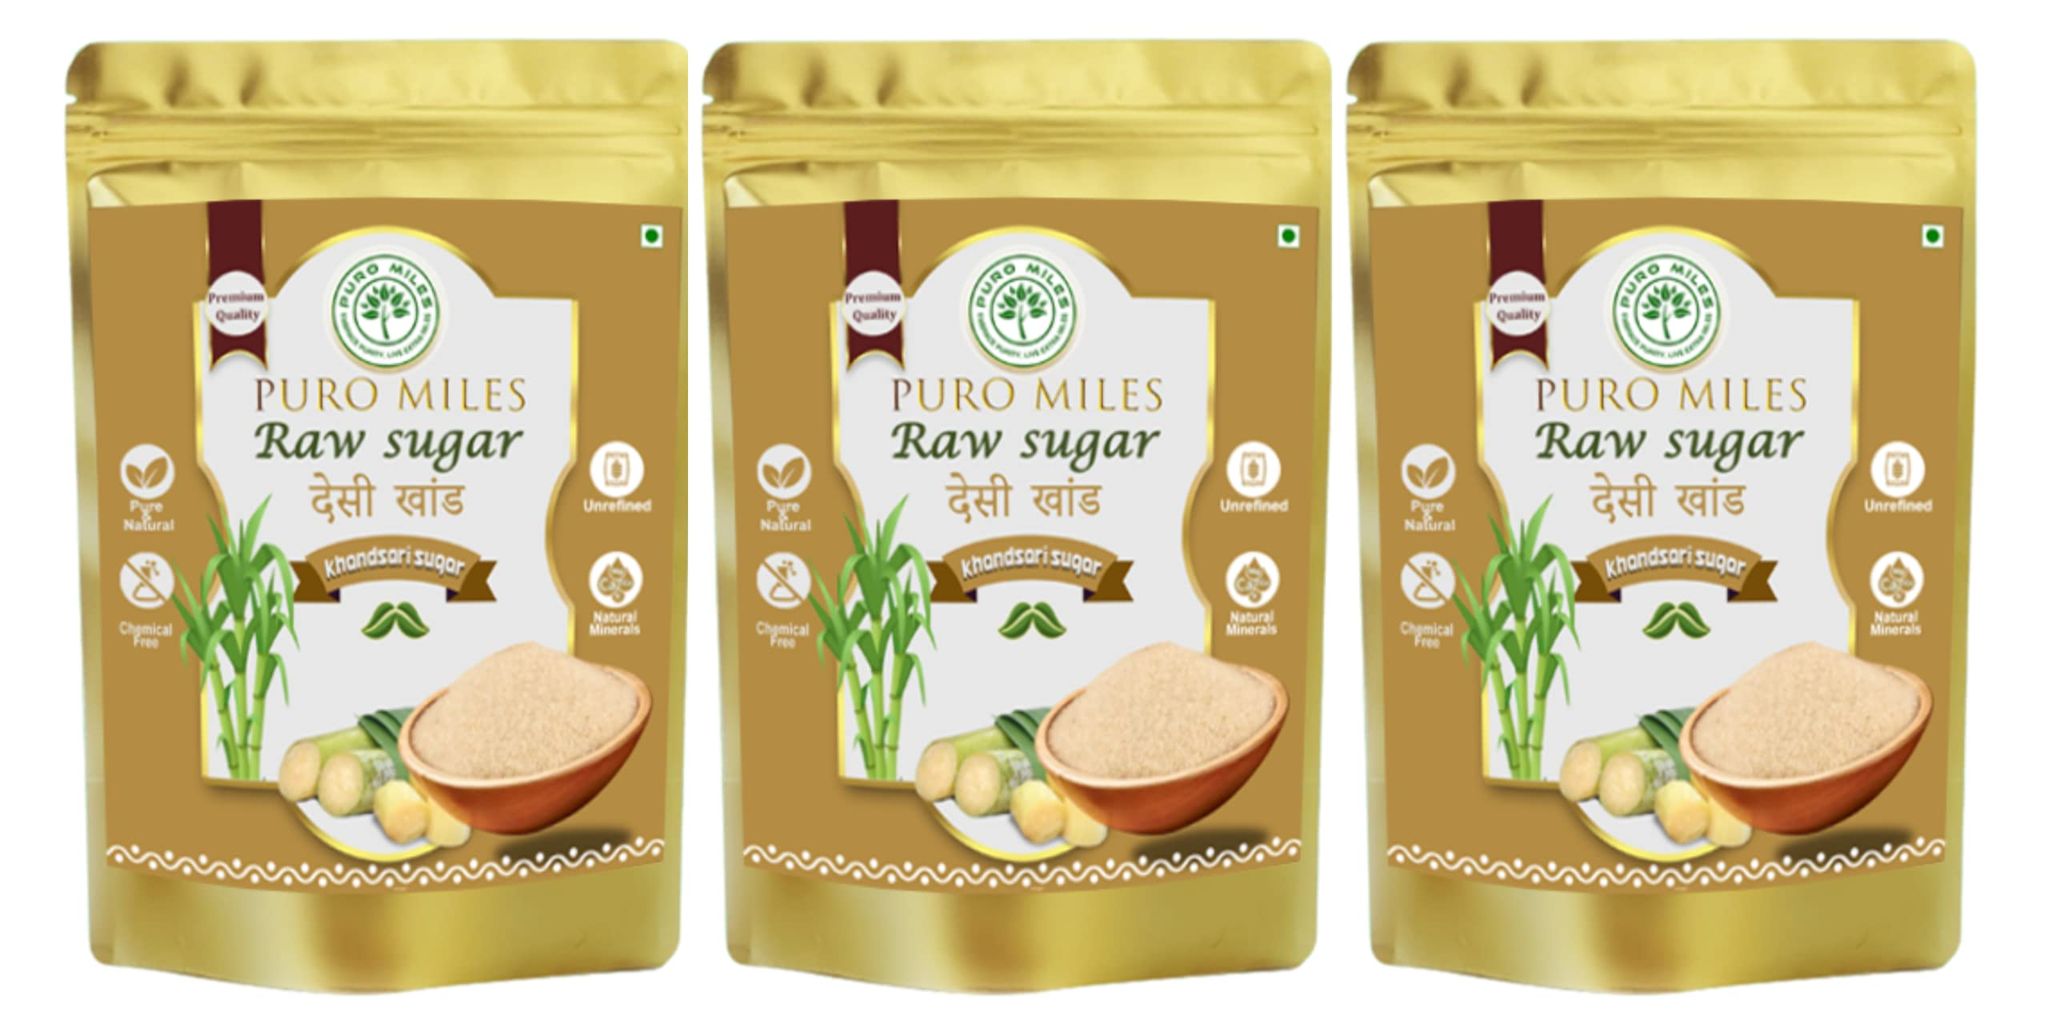 Puro Miles Raw Sugar | Desi Khandsari Sugar | Organic & Unrefined | Unprocessed & Natural | Free from chemicals and preservatives | Substitute to refined white sugar | Immunity booster (2.4 Kg)